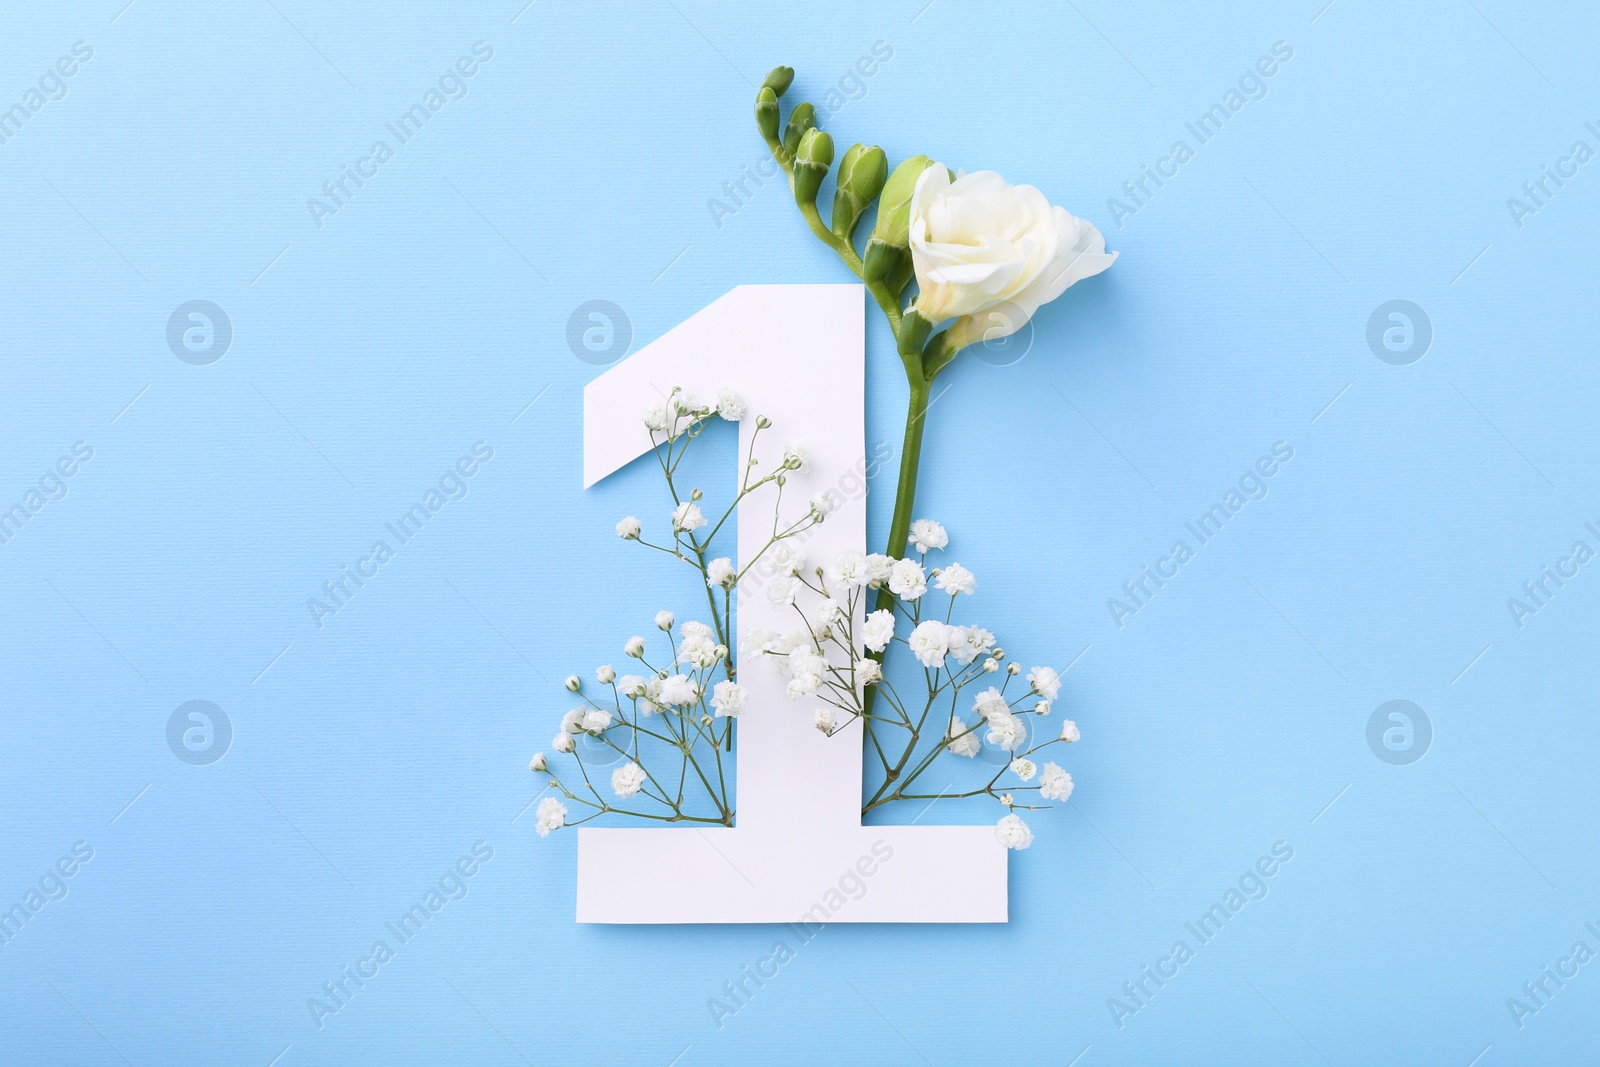 Photo of Paper number 1 and beautiful flowers on light blue background, top view